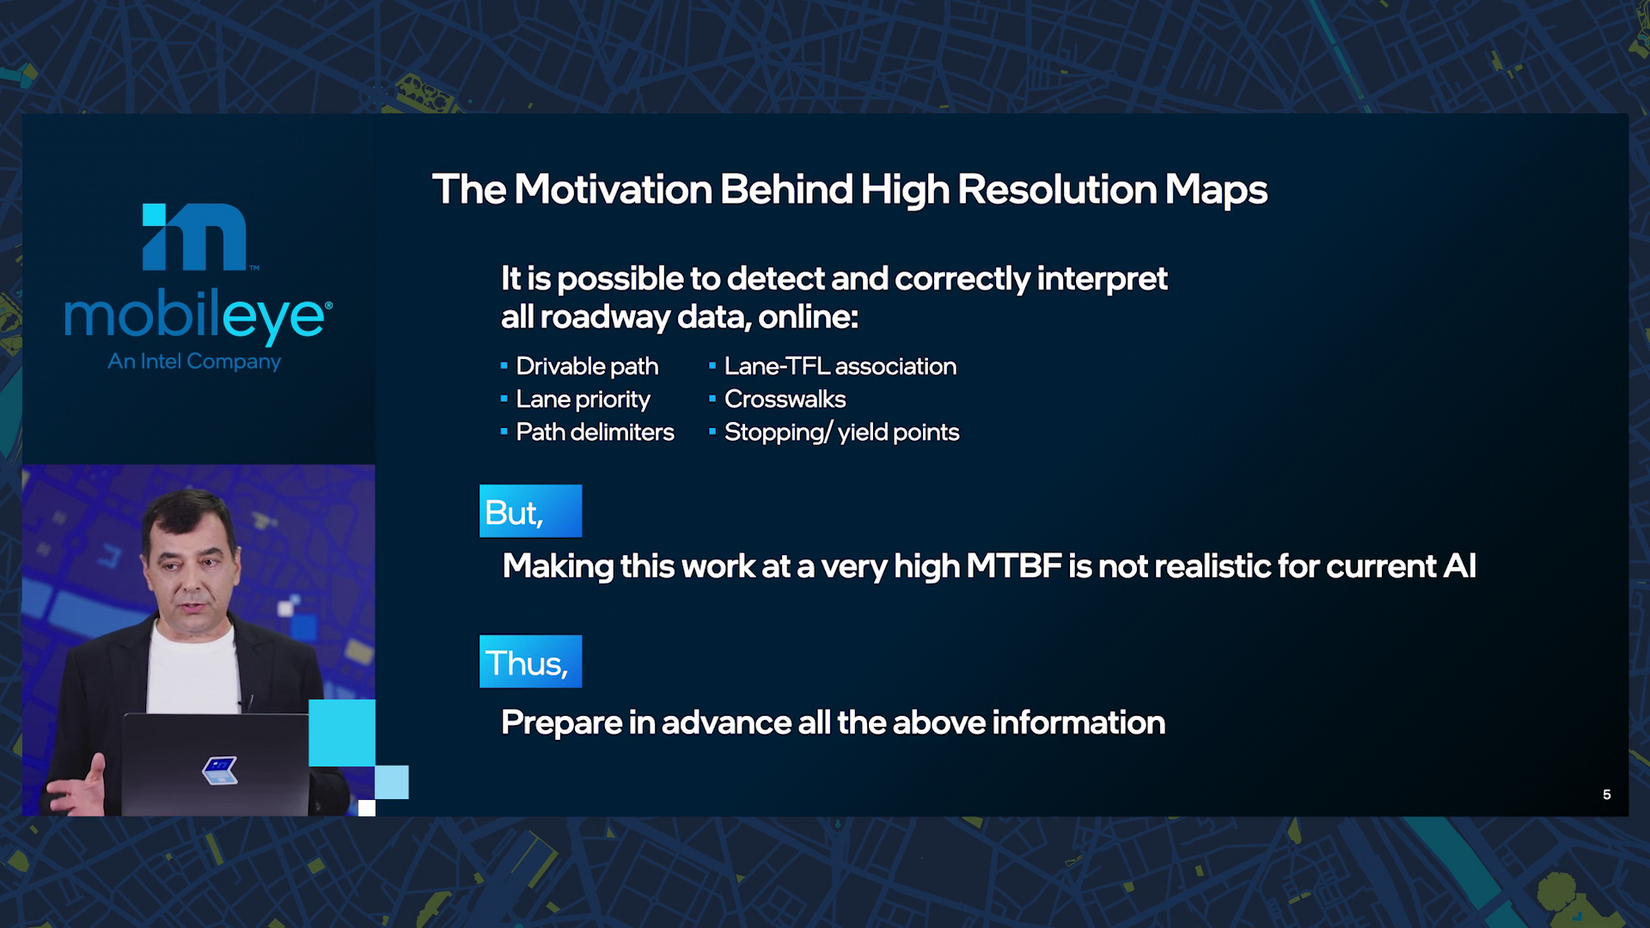 The motivation behind high resolution maps